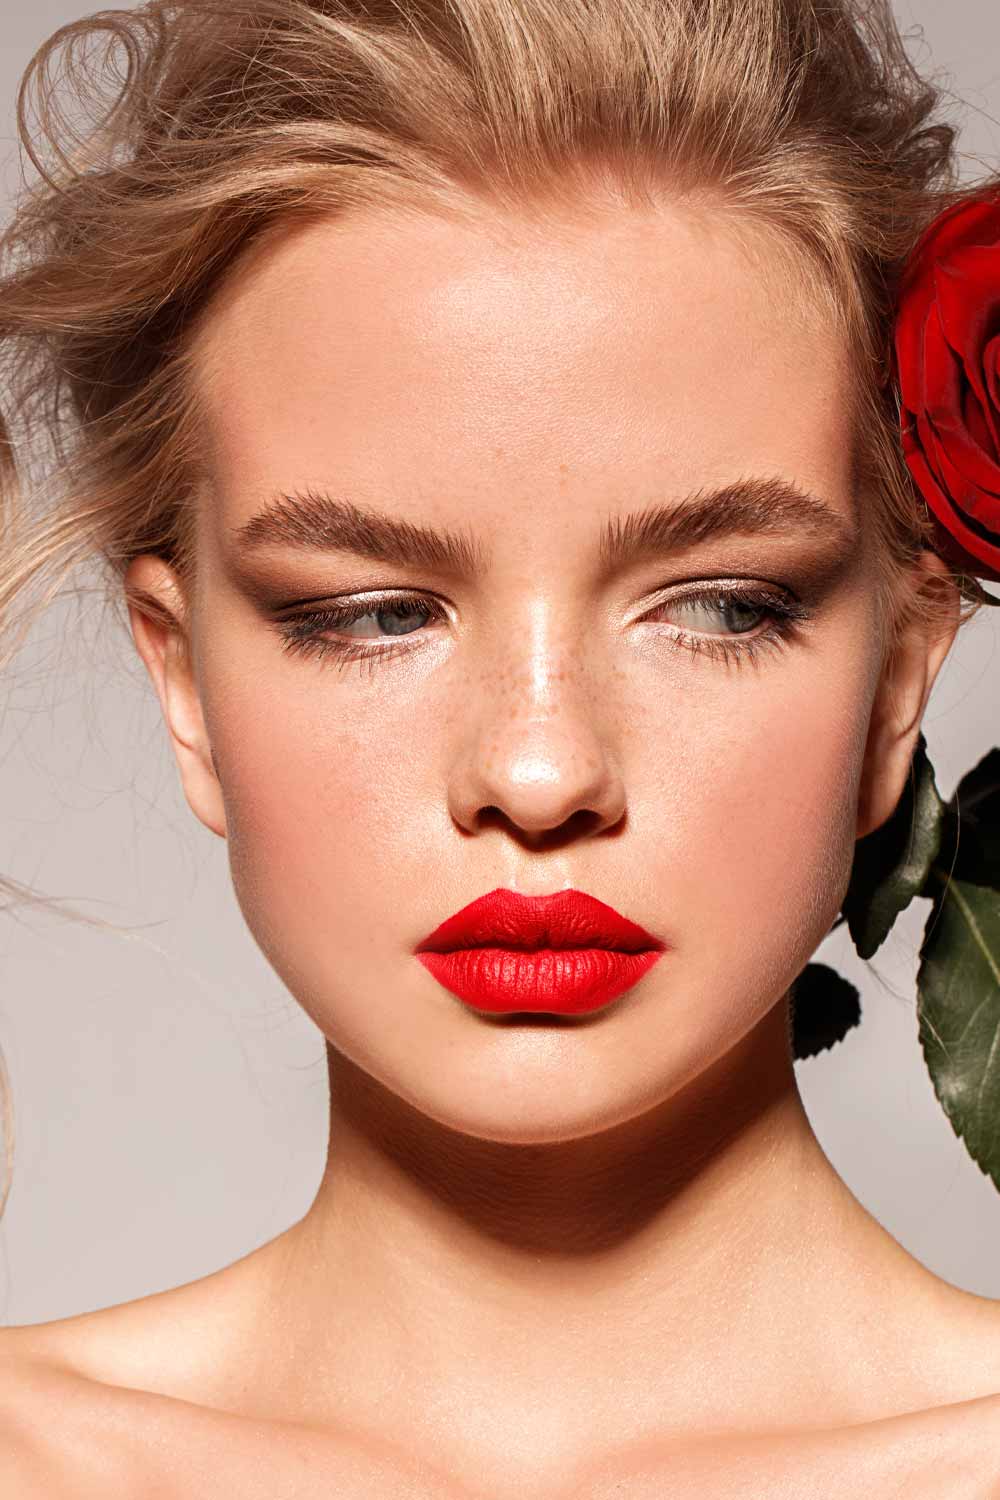 11 Quotes For Women With A Resting Bitch Face